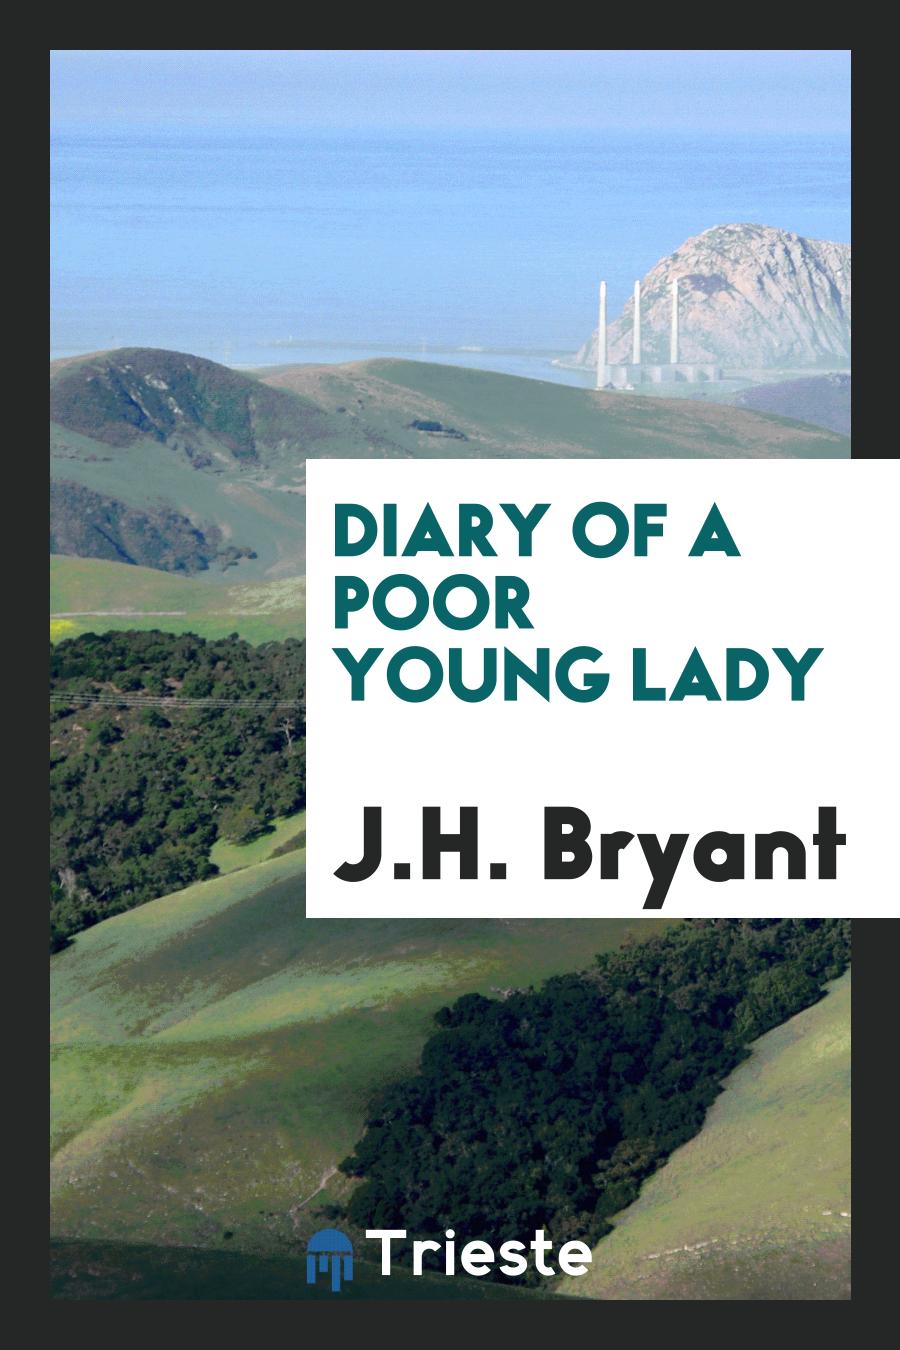 Diary of a Poor Young Lady